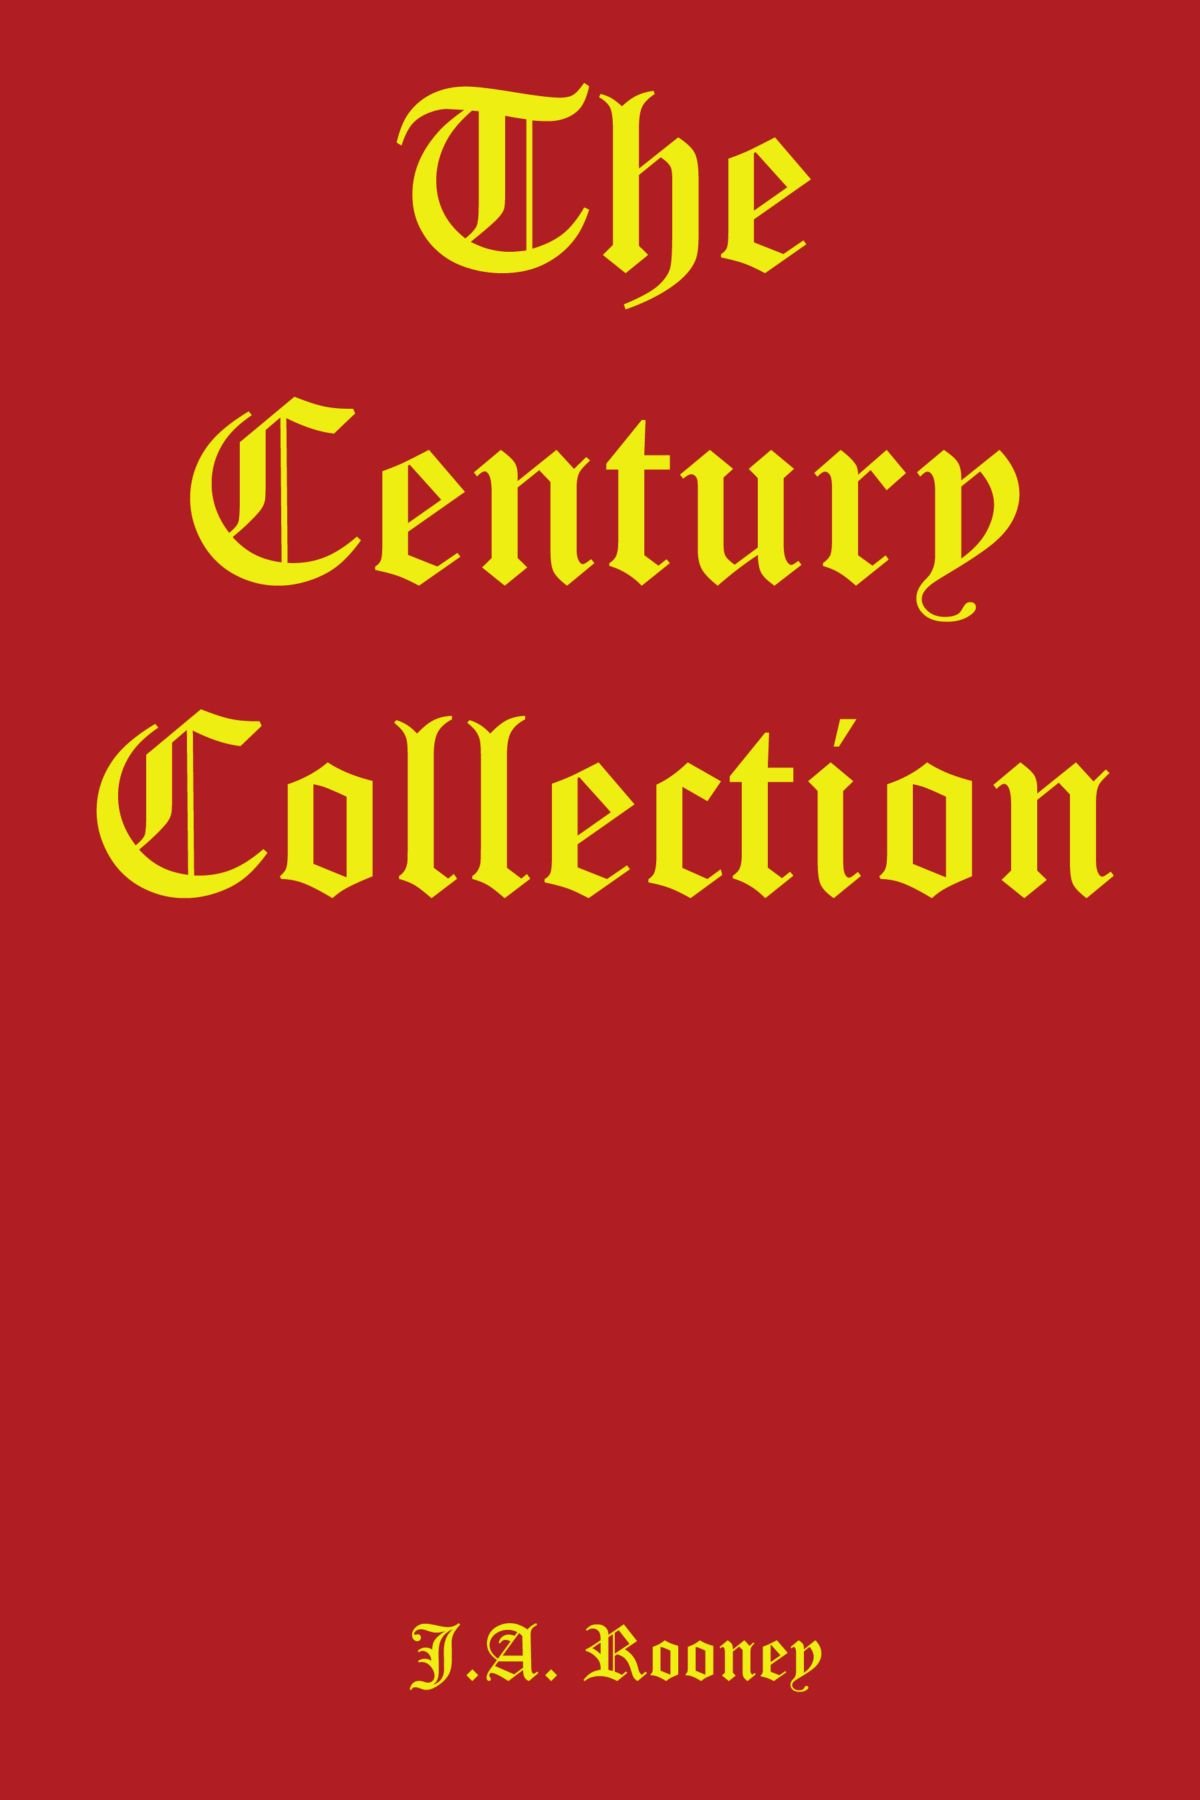 THE CENTURY COLLECTION